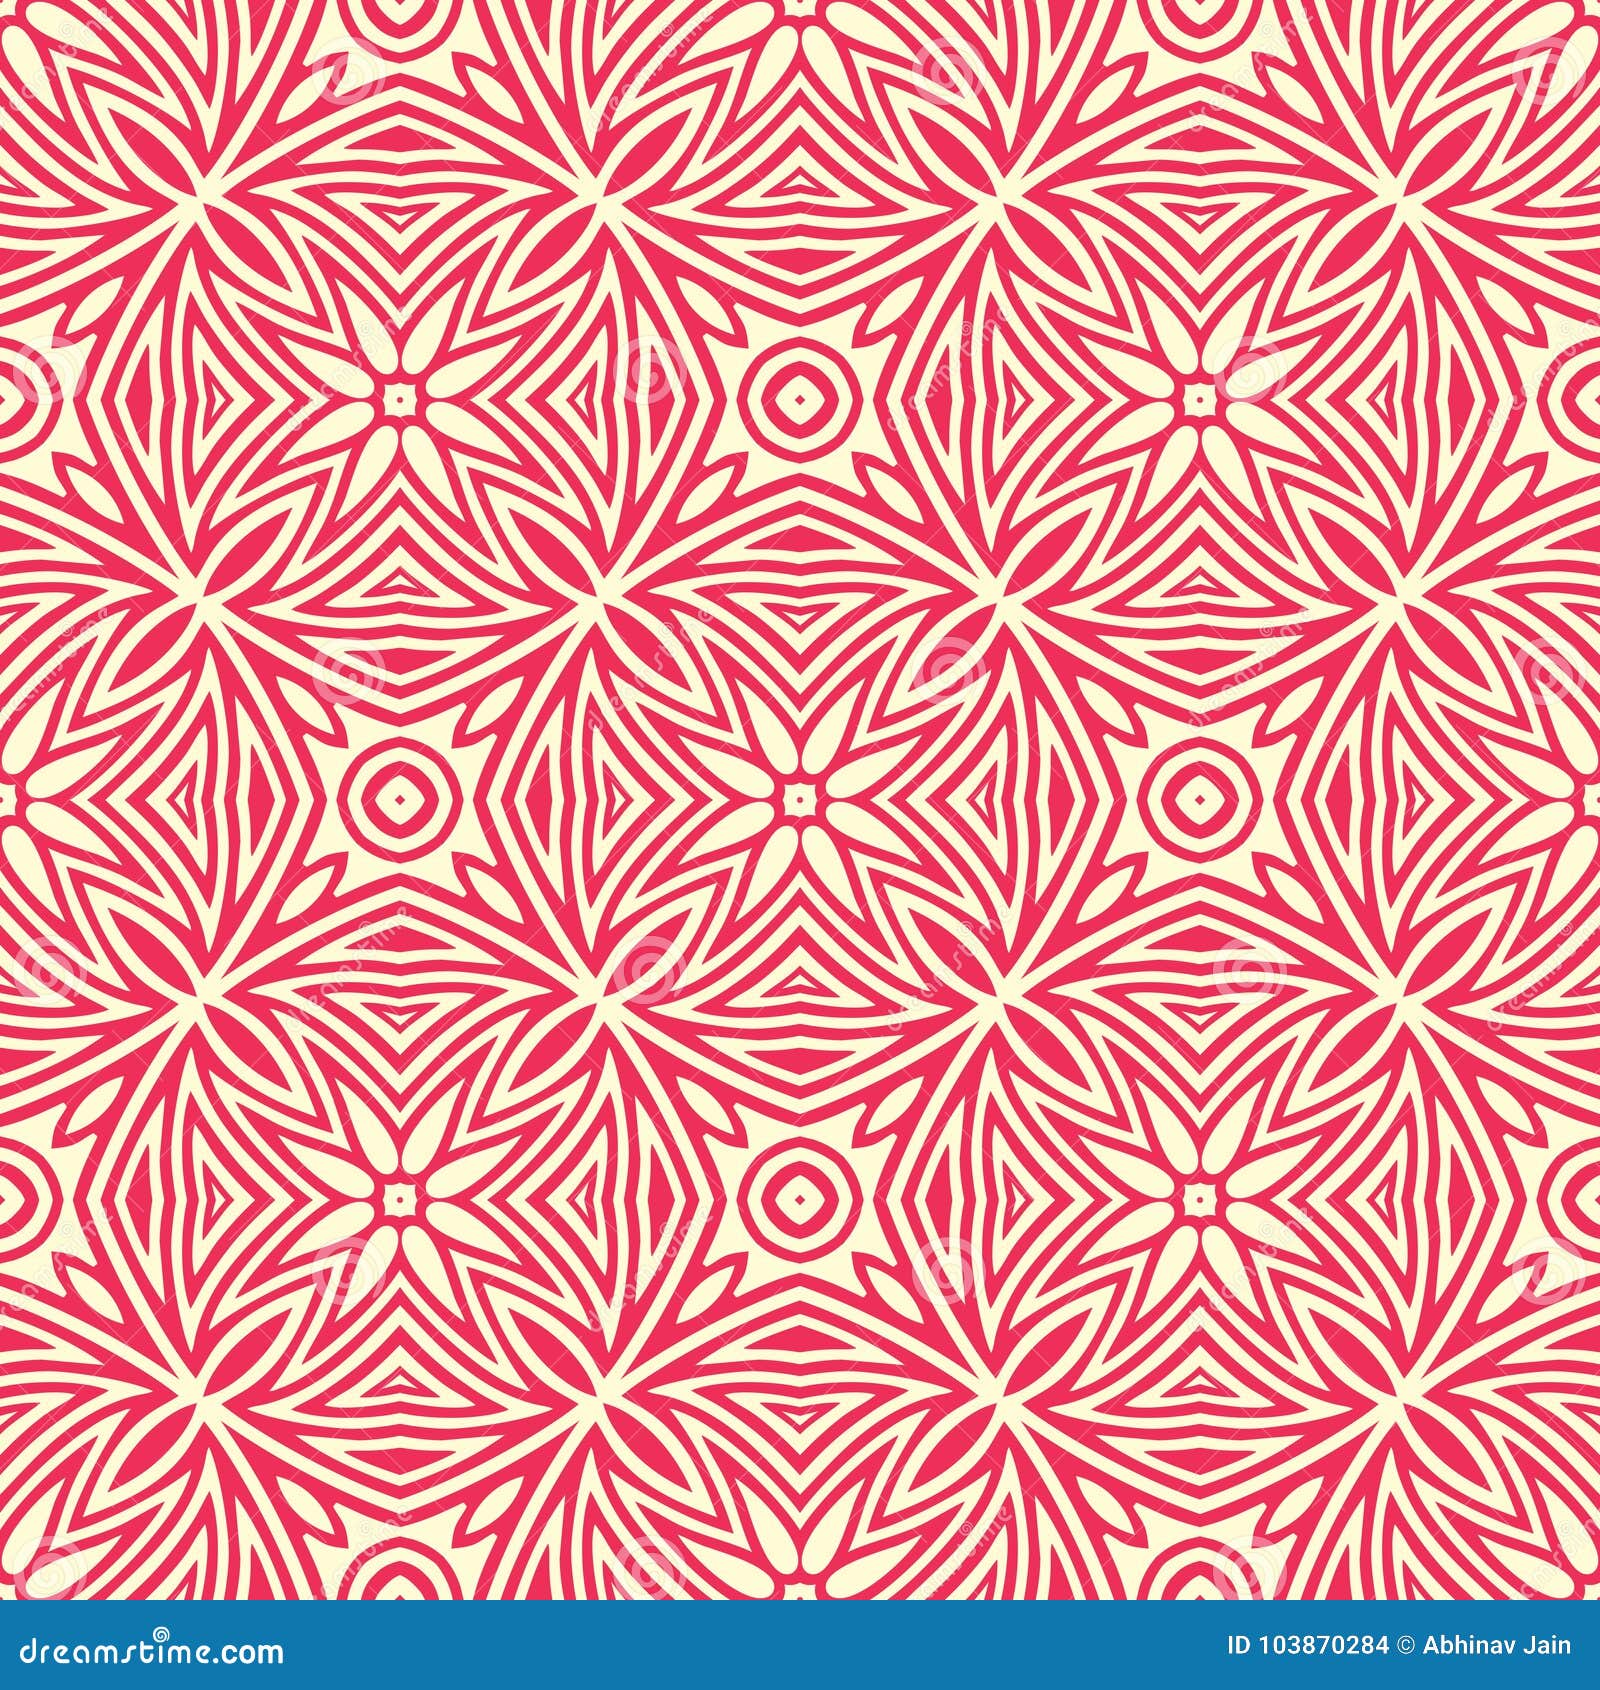 Dazzling Star Flowers Seamless Pattern Background Illustration in Red and Off White Tone Stock - Illustration of star, 103870284